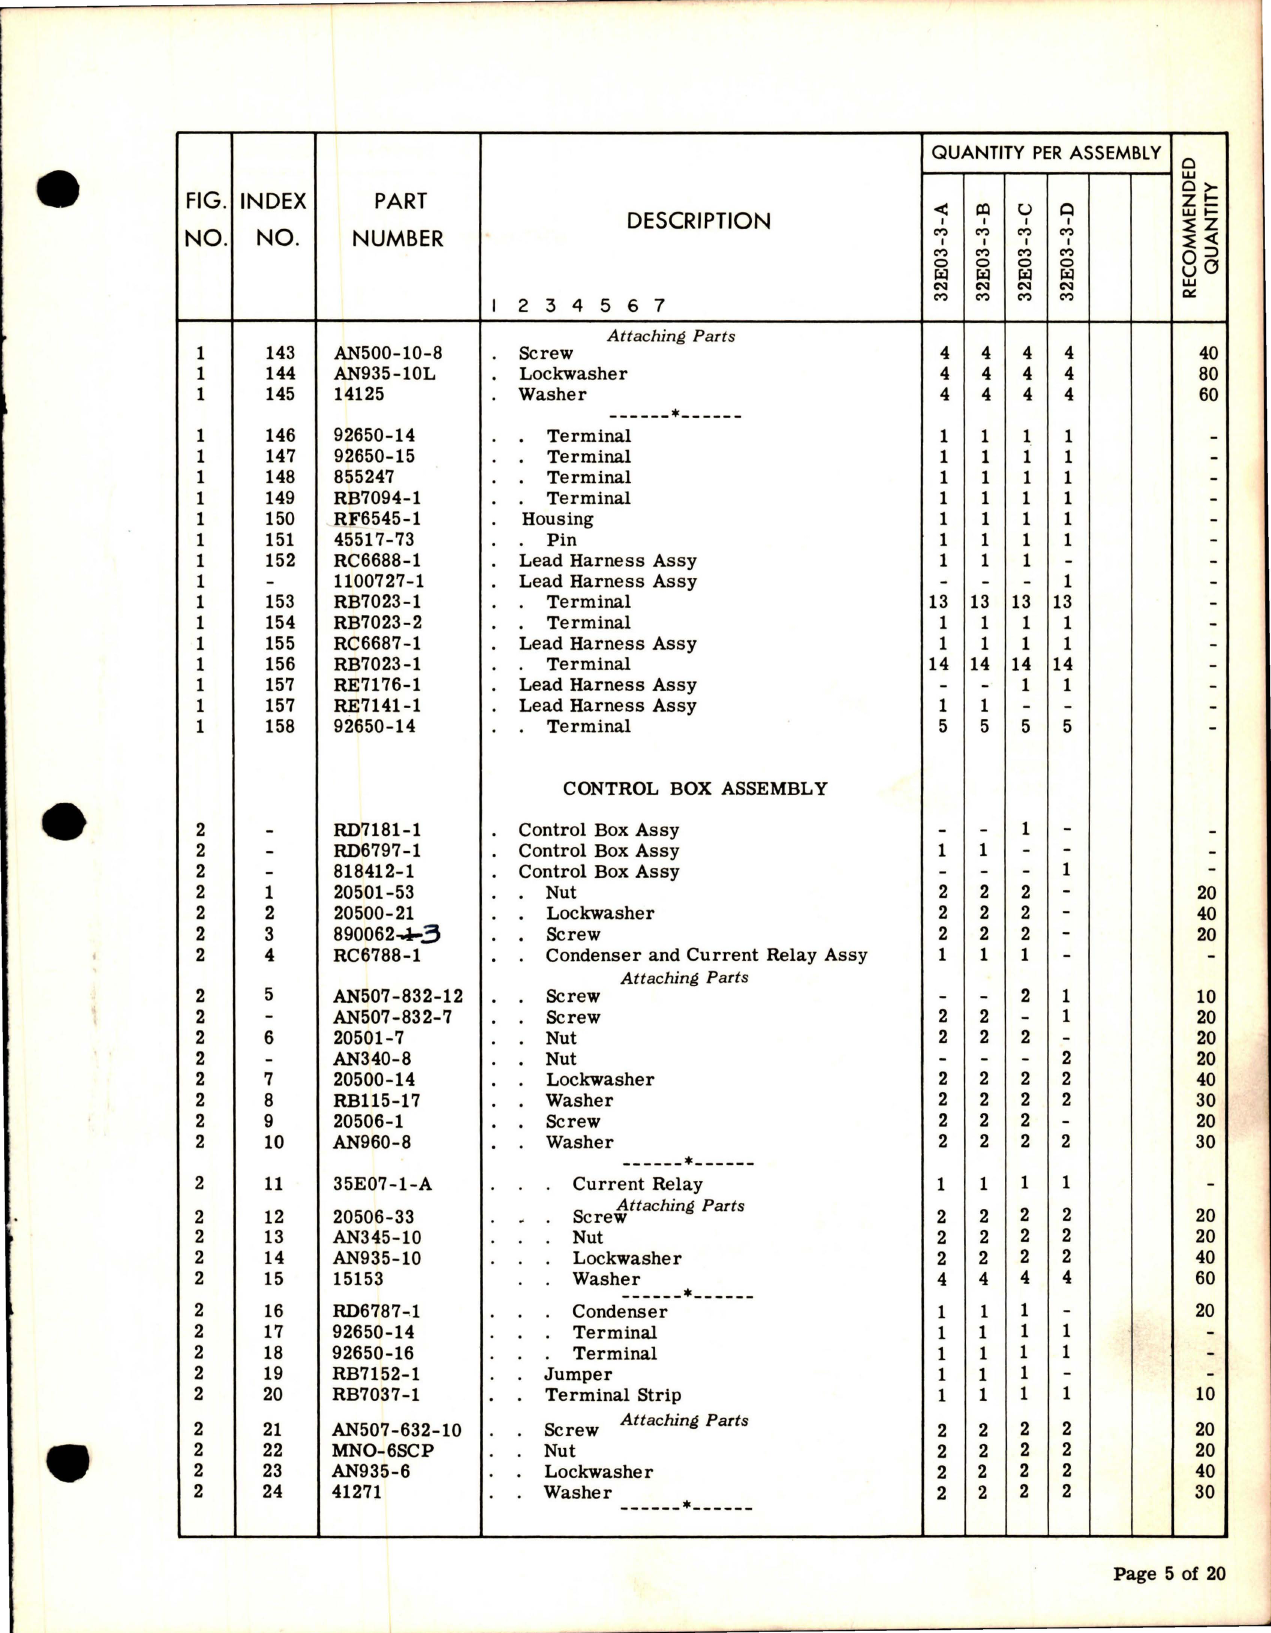 Sample page 5 from AirCorps Library document: Parts List for Inverter - Parts 32E03-3-A, 32E03-3-B, 32E03-3-C, and 32E03-3-D 